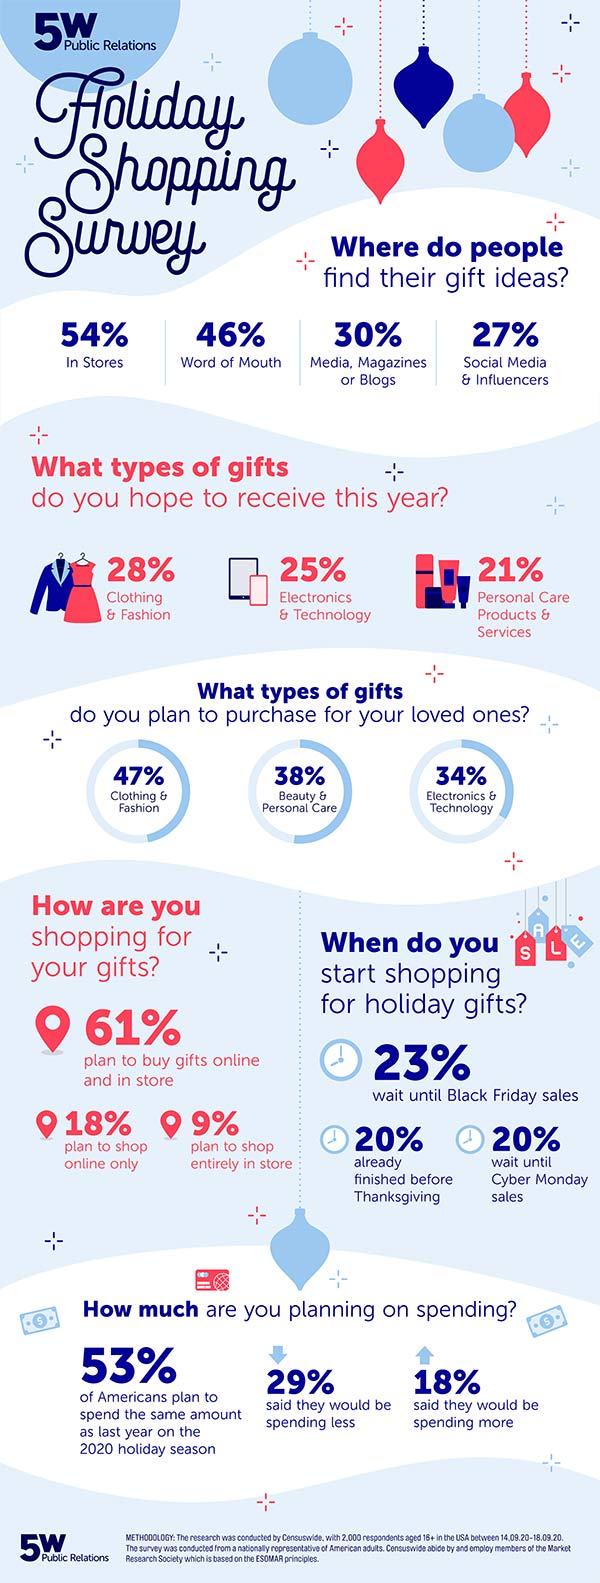 Consumers chime in on 2020 holiday shopping—what can marketers expect?